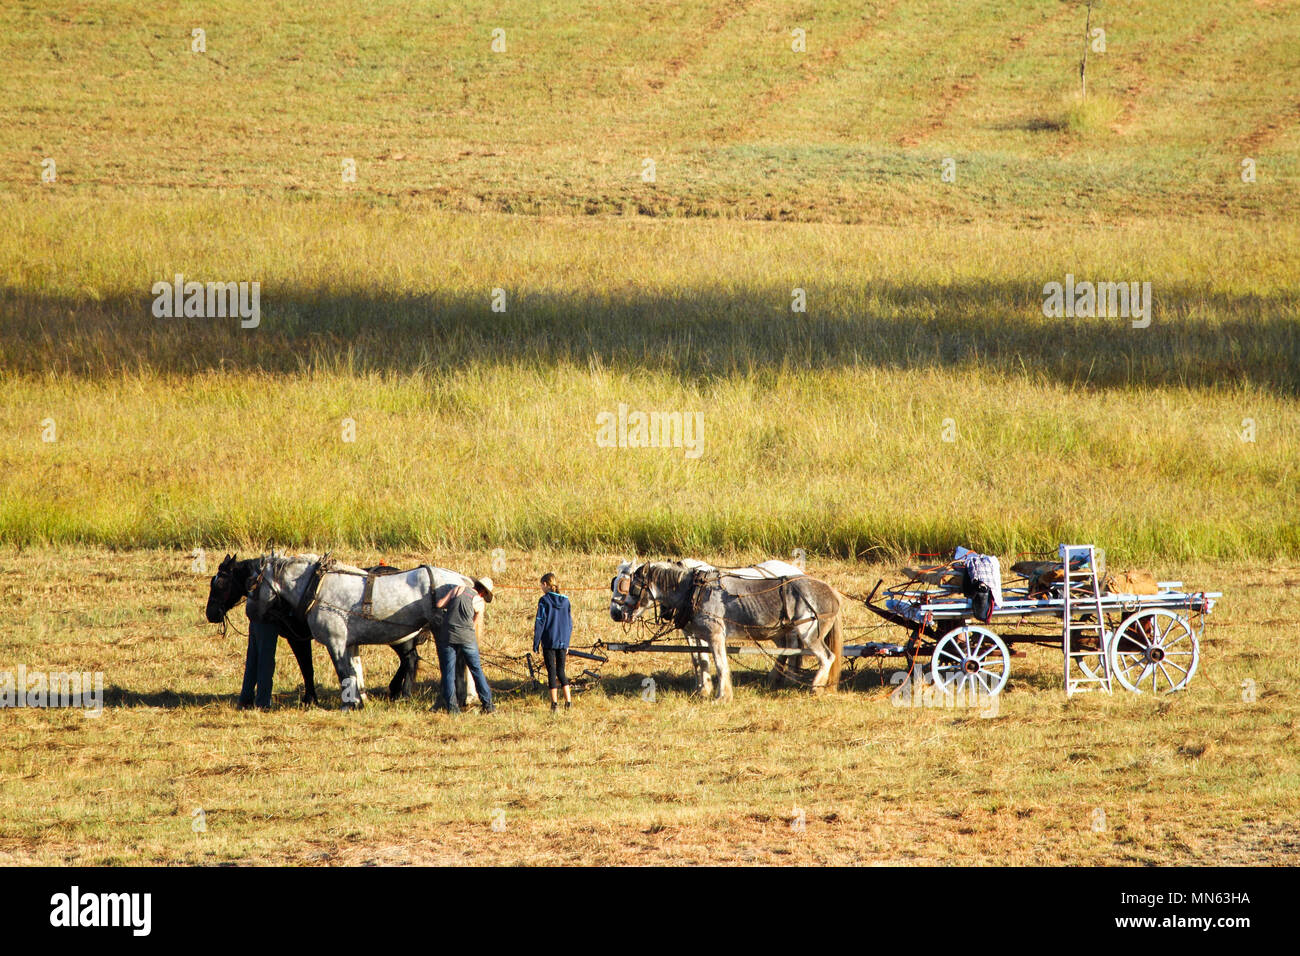 People hooking up a team of horses to a wagon. Stock Photo